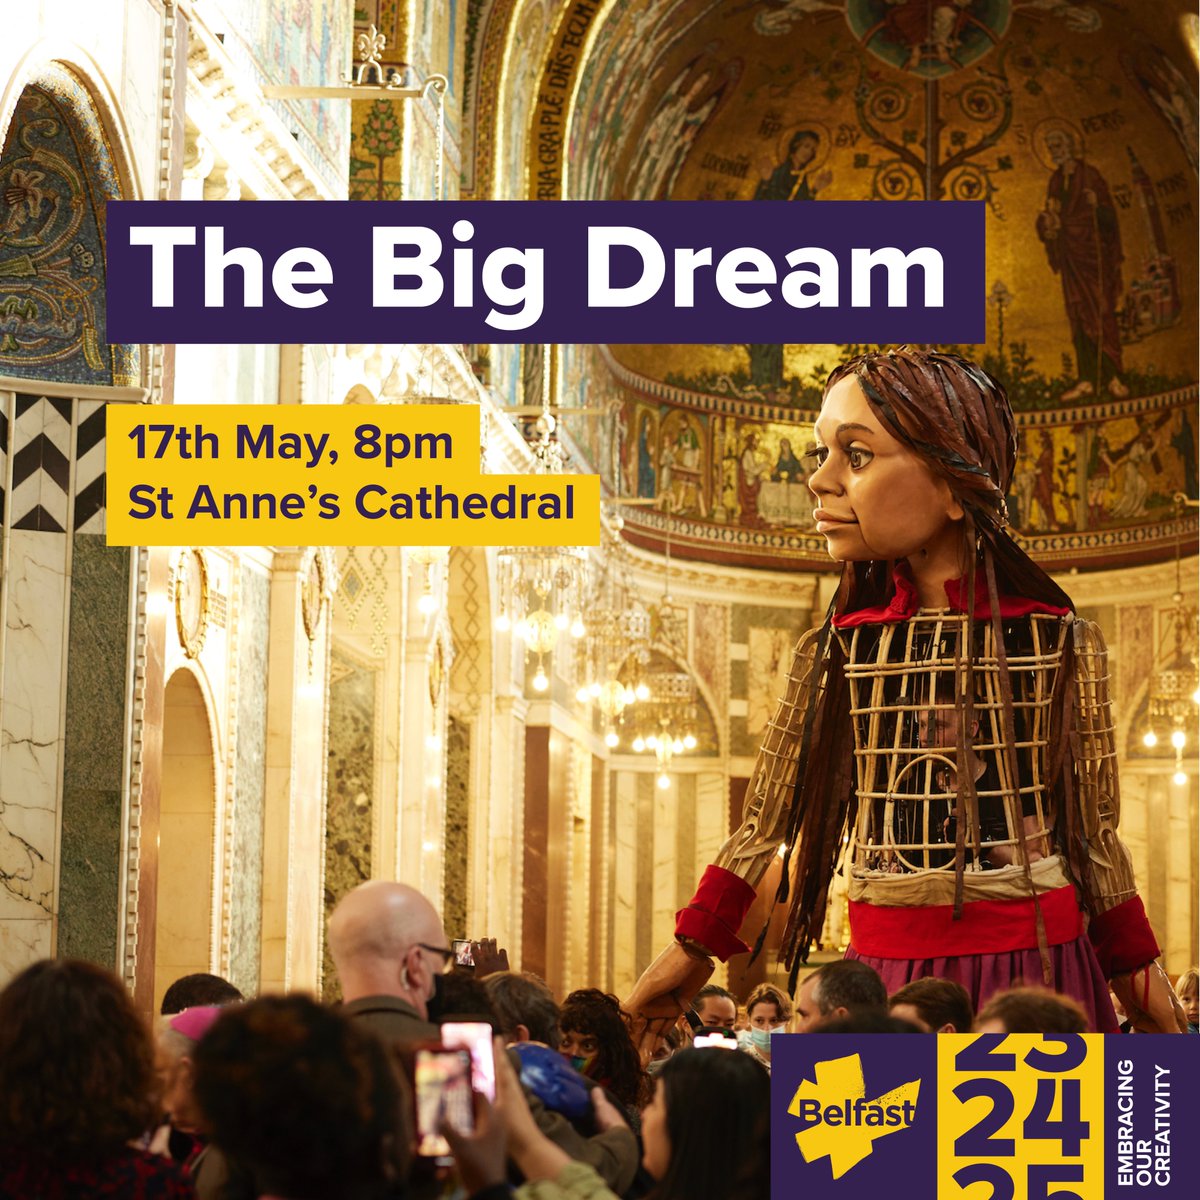 The Big Dream 🌚 A dreamy night of music and celestial celebration featuring some of Northern Ireland’s most exciting musical talent: Beauty Sleep, Winnie Ama, Hex hue, Huartan, Laytha, Garrett Laurie, The Sanctuary Choir and more to be announced. As the sun makes way for the…